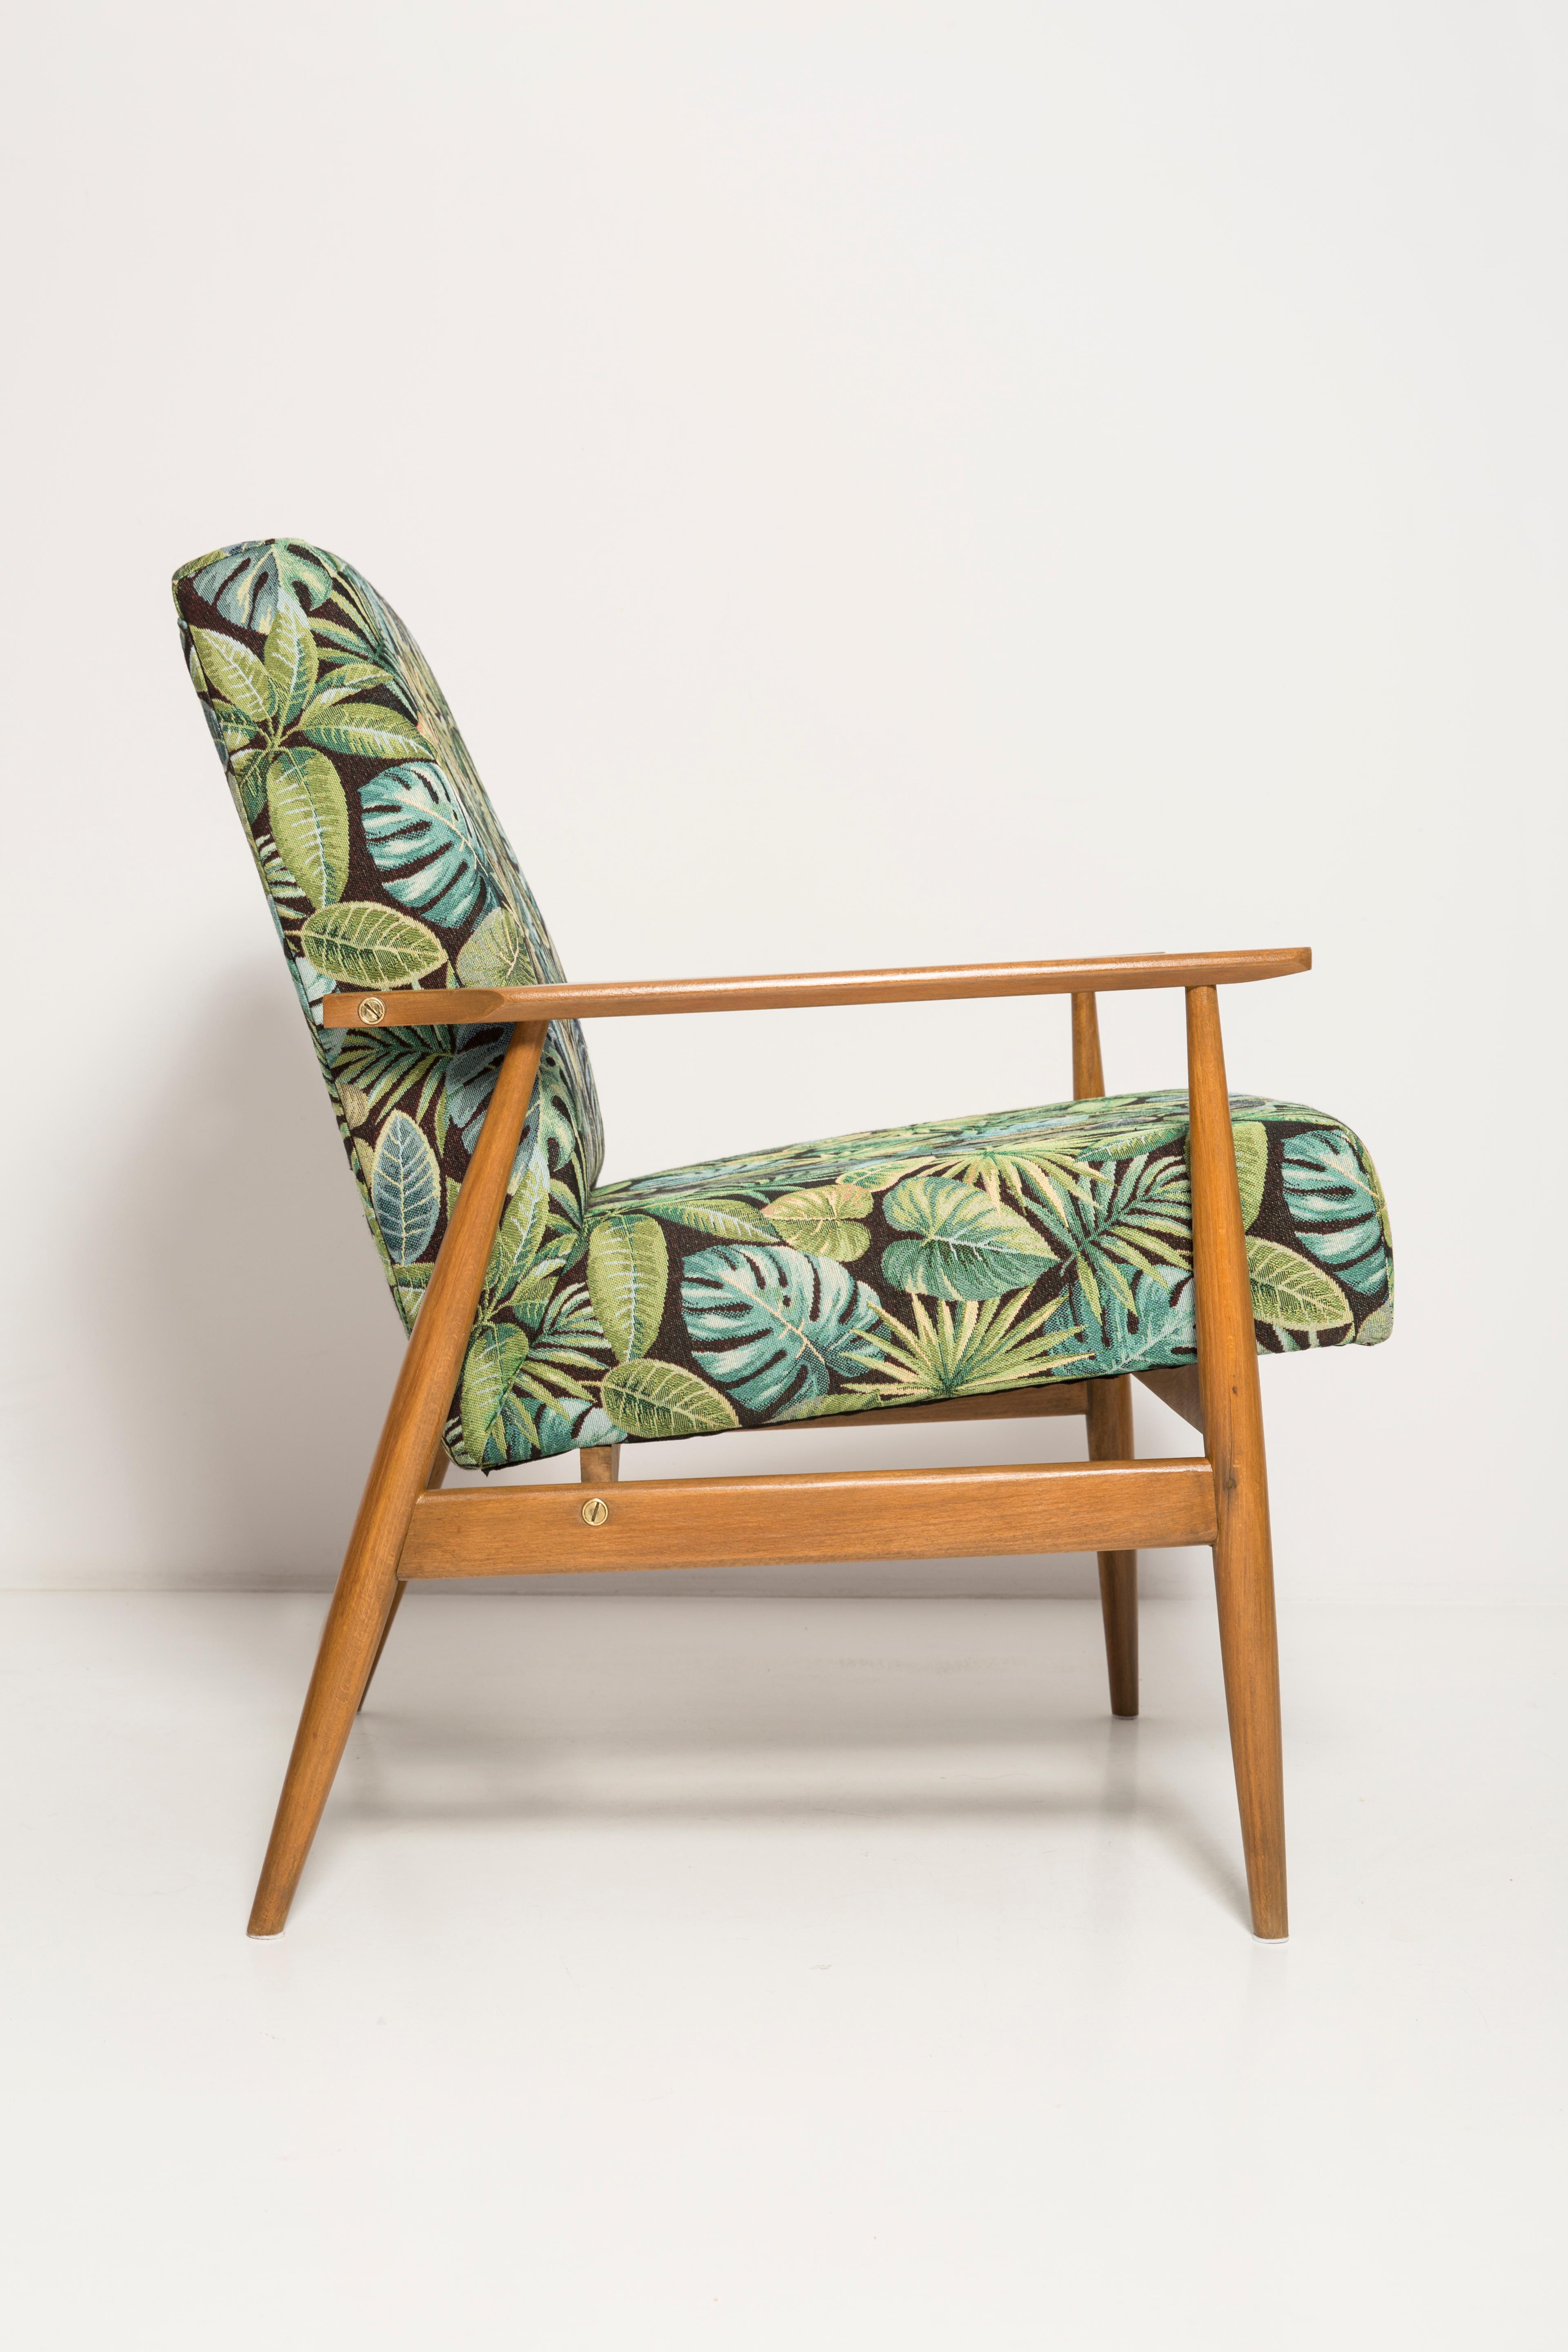 Pair of Mid-Century Green Leaves Jacquard Dante Armchairs, H. Lis, 1960s For Sale 3